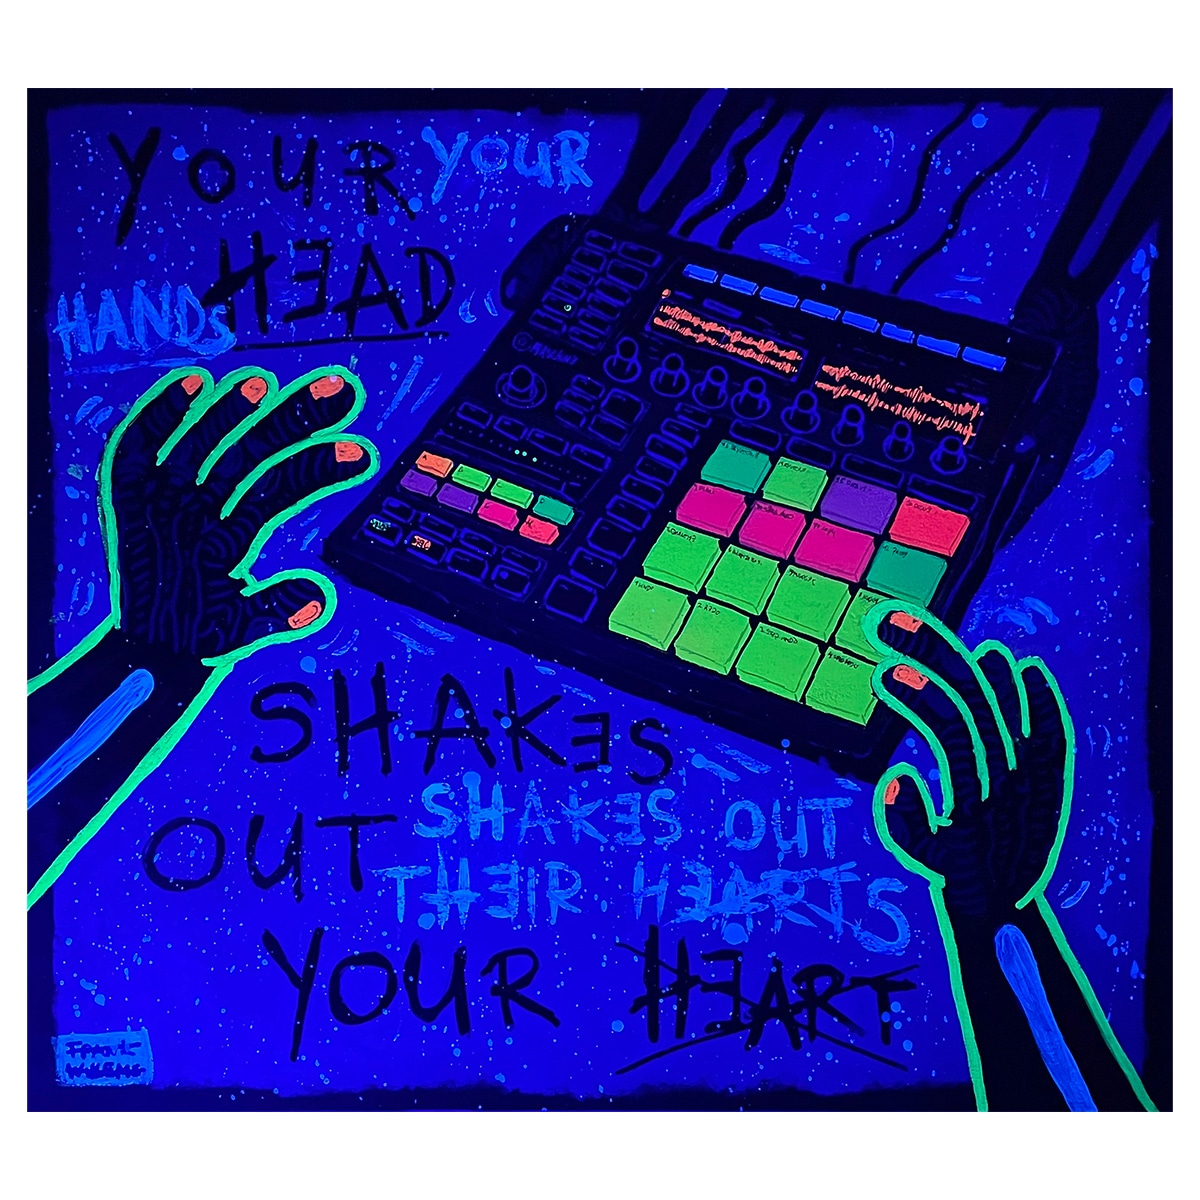 Artwork -_0011_YOUR HEAD SHAKES OUT YOUR HEART blacklight - Frank Willems